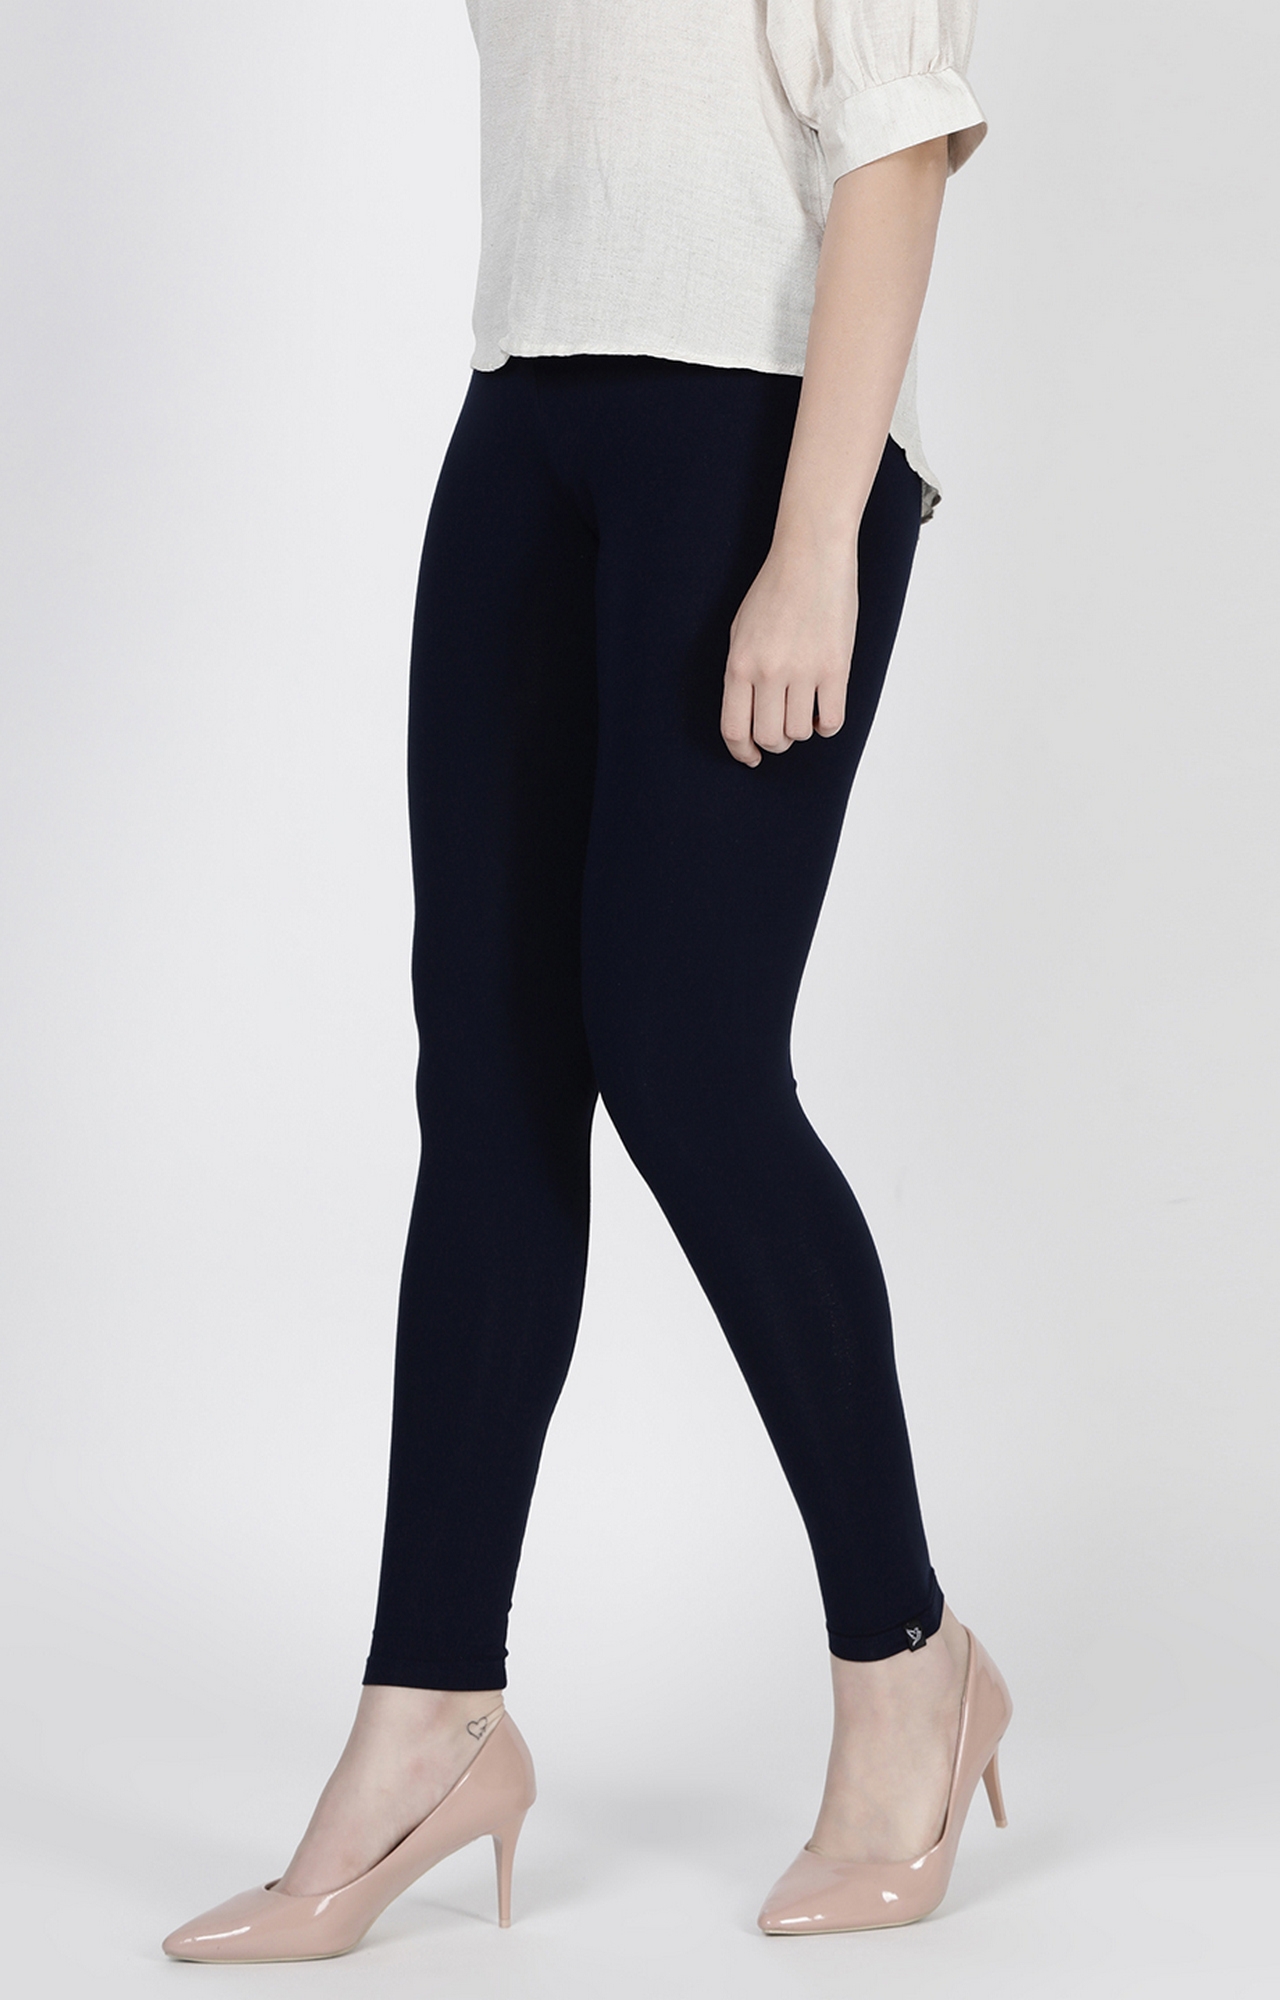 Twinbirds Navy Blue Solid Ribbon Ankle Legging